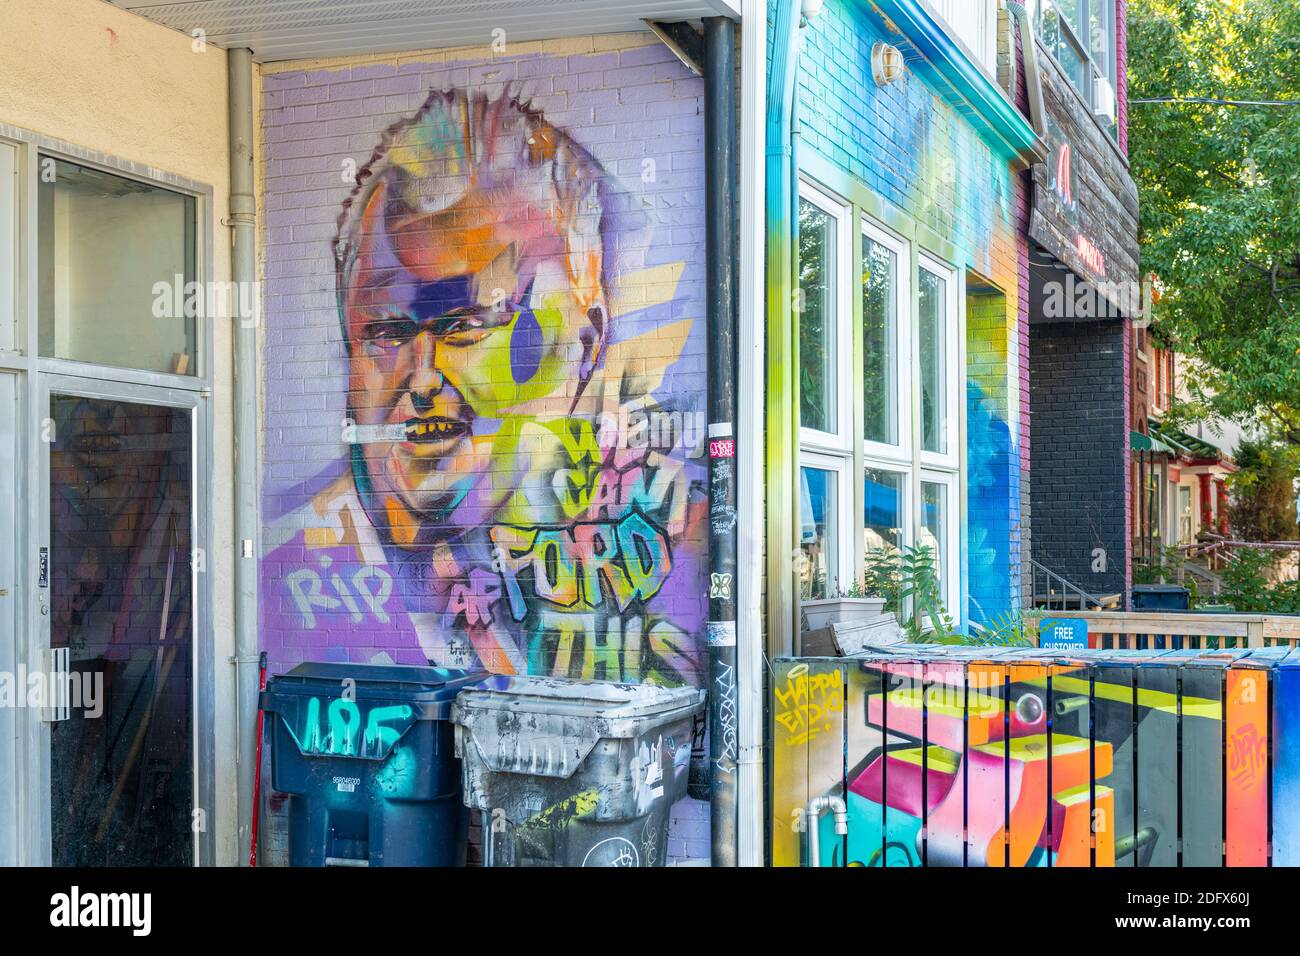 Image of Rob Ford painted in Kensington Market in Toronto, Canada Stock Photo